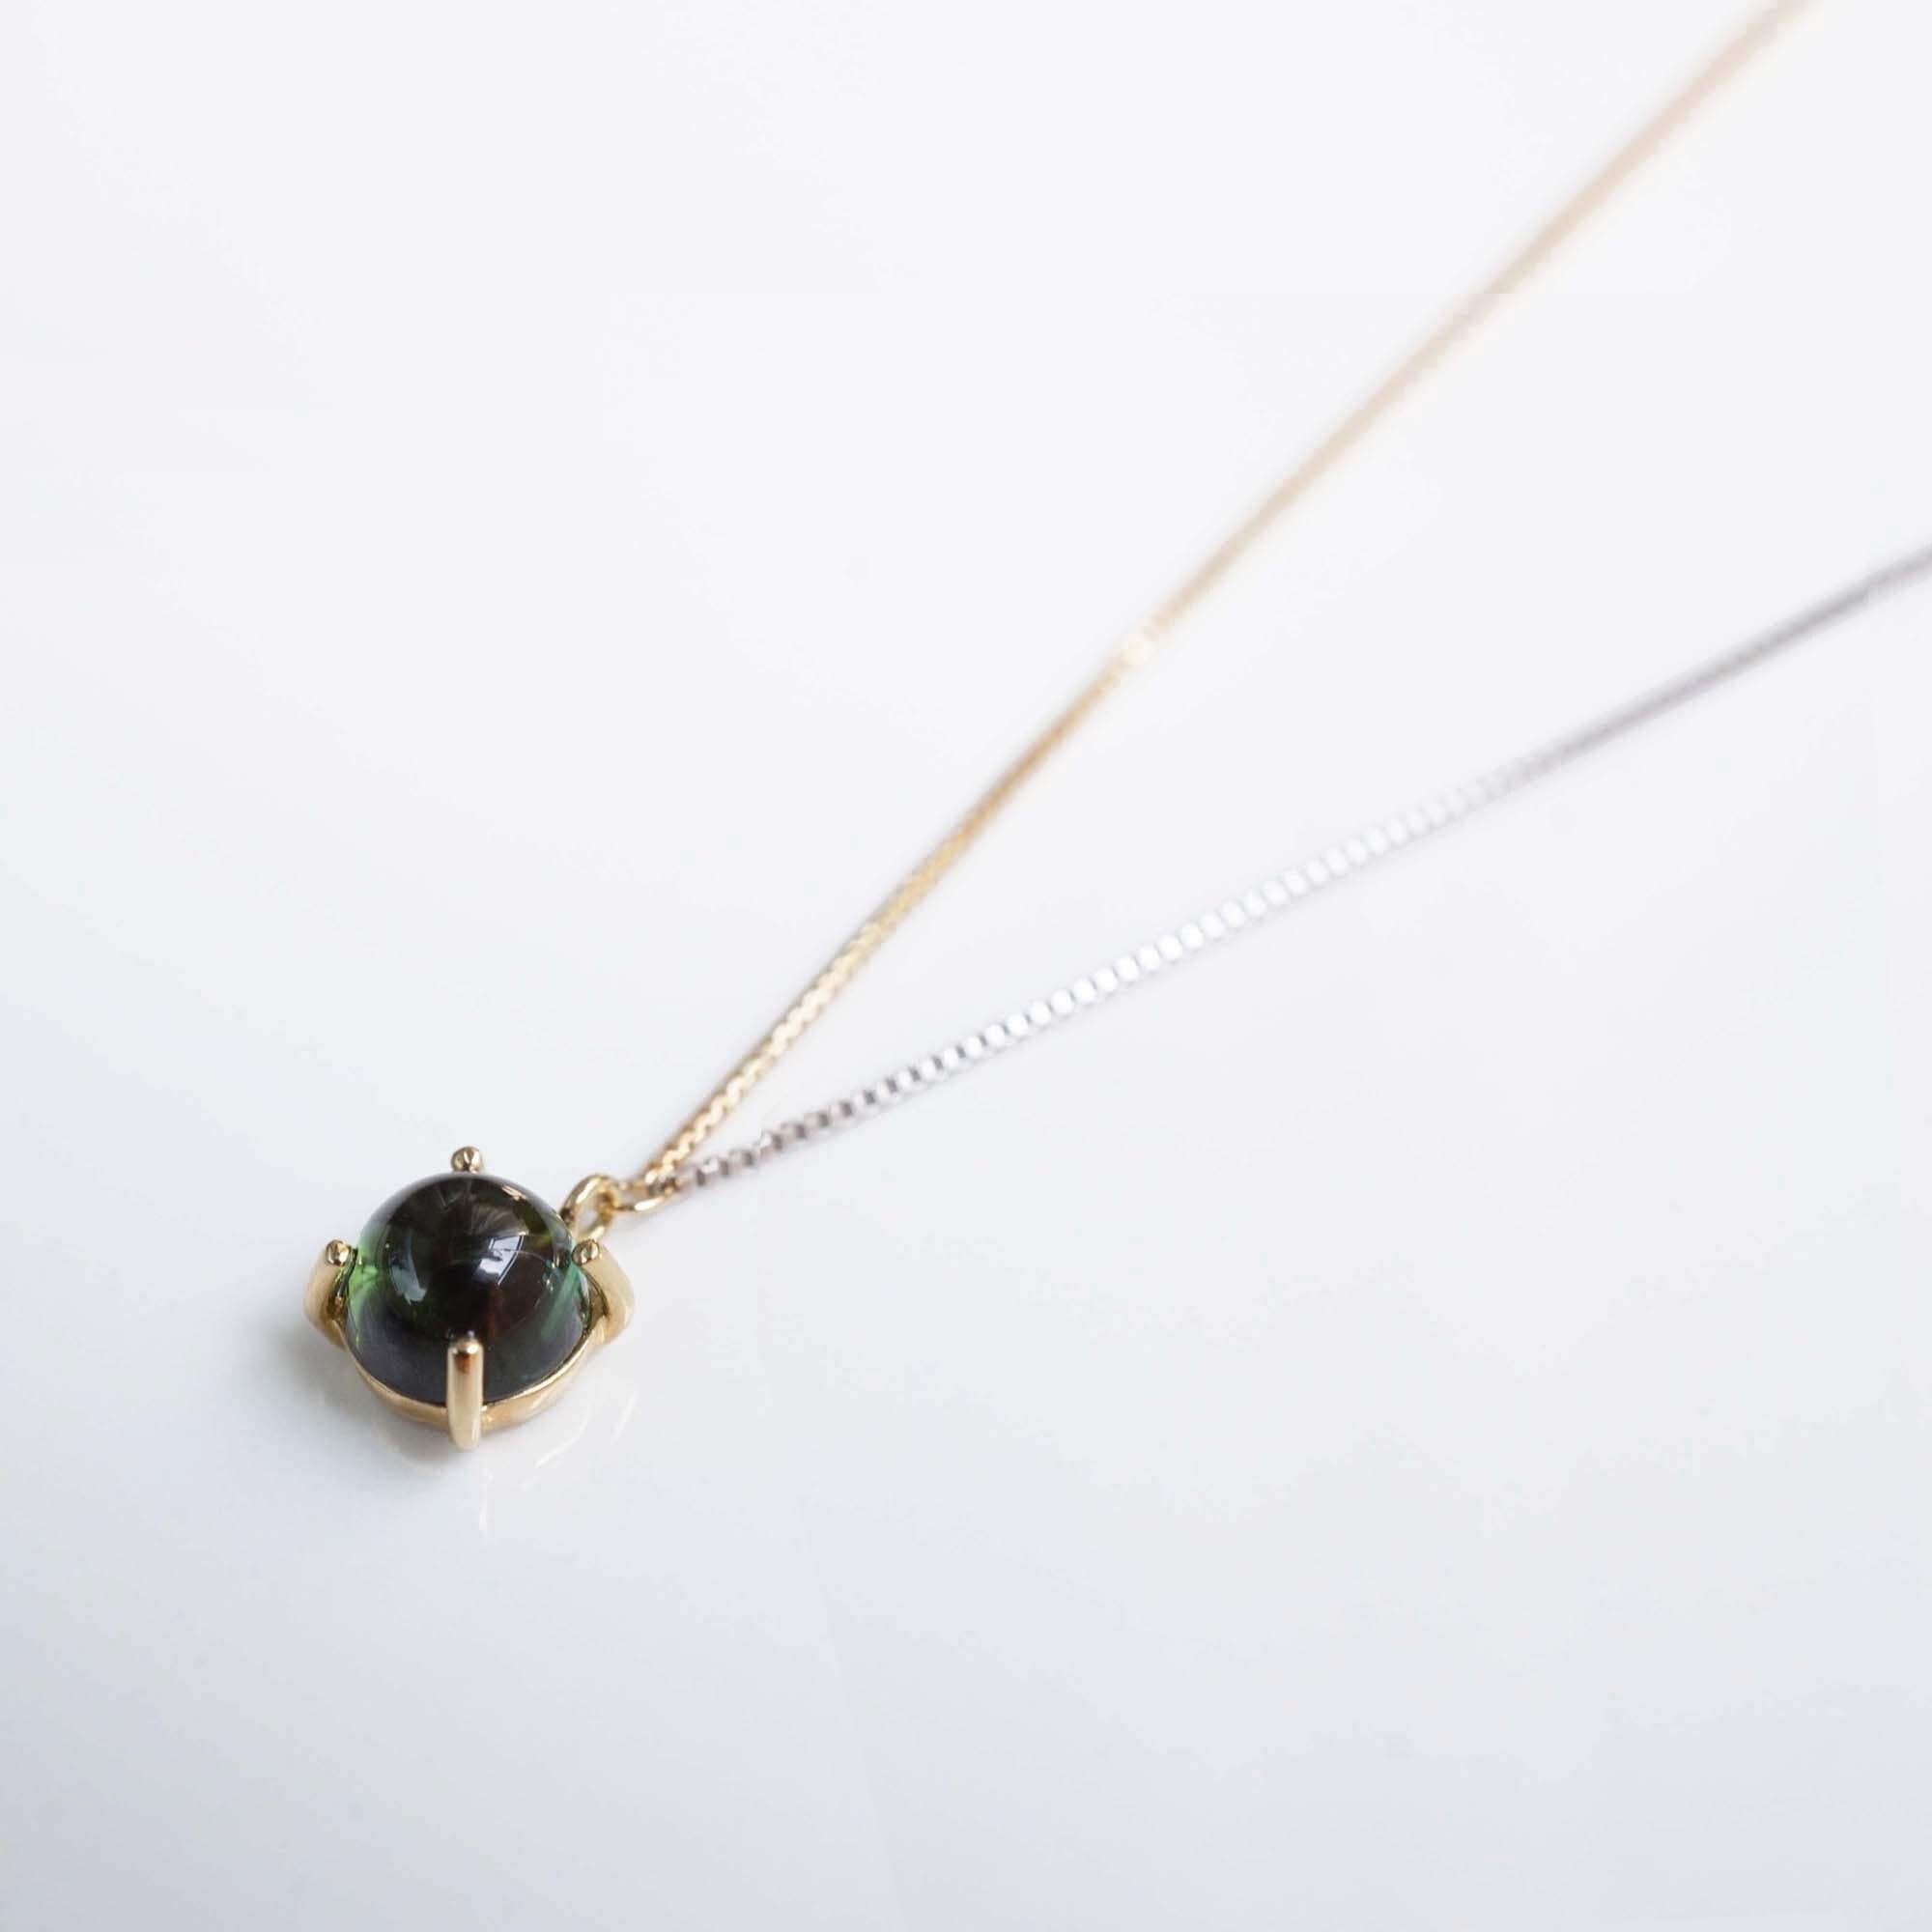 One n' Only / Green Tourmaline Long Necklace（N169-GT）